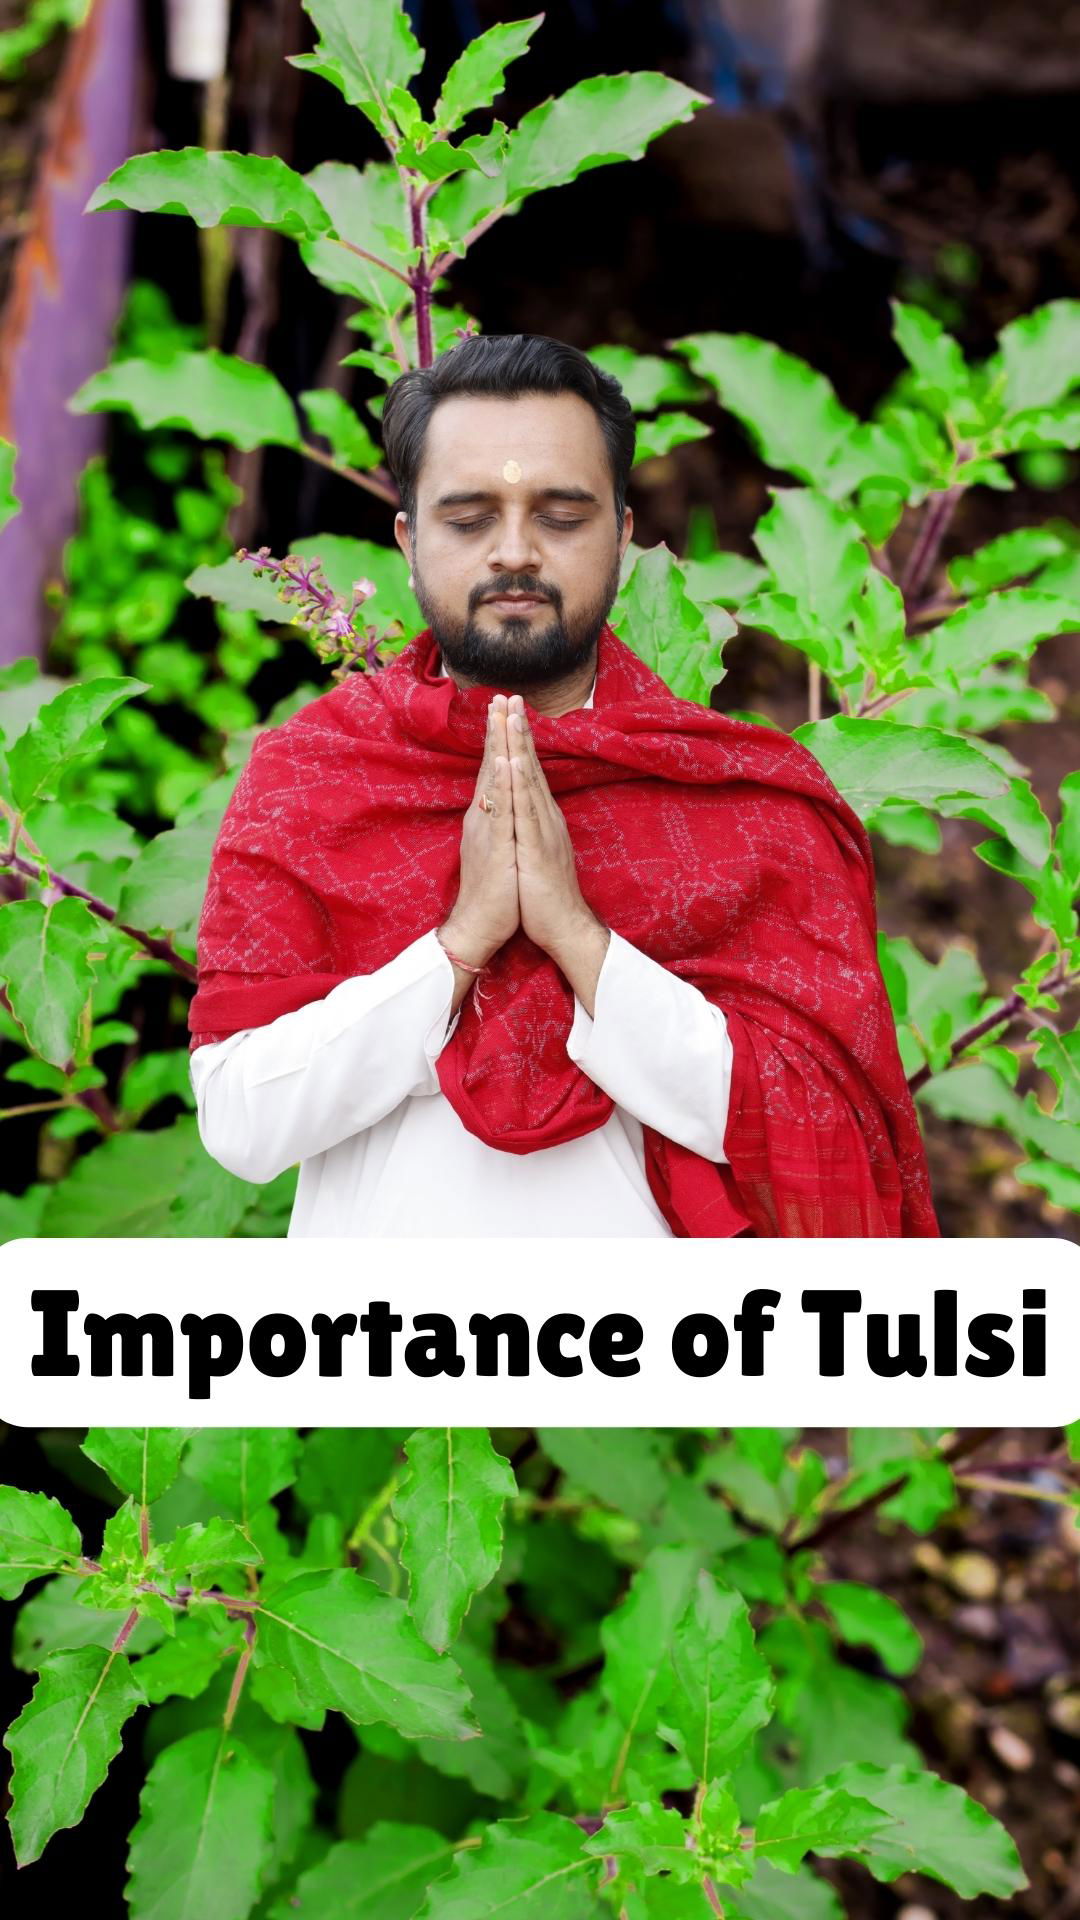 The importance of Tulsi